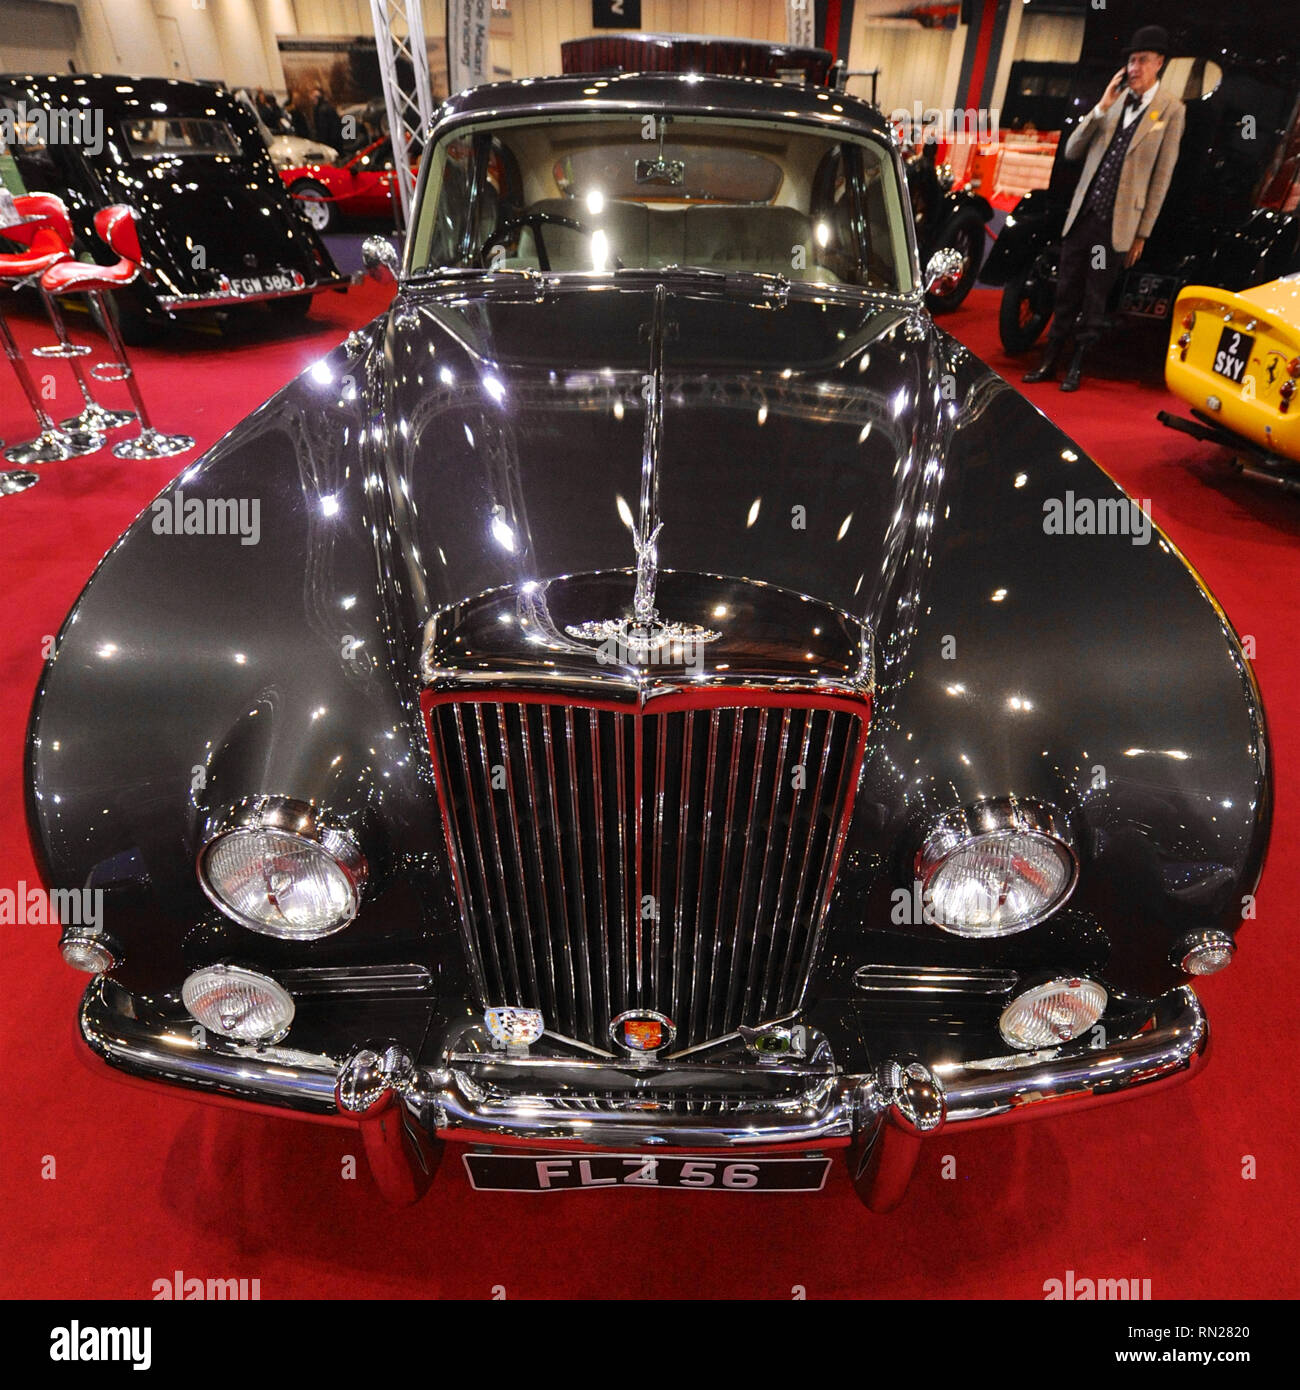 London, UK. 16th Feb 2019. A 1956 Bentley S1 Continental Fastback on display at the London Classic Car Show which is taking place at ExCel London, United Kingdom.   Credit: Michael Preston/Alamy Live News Stock Photo